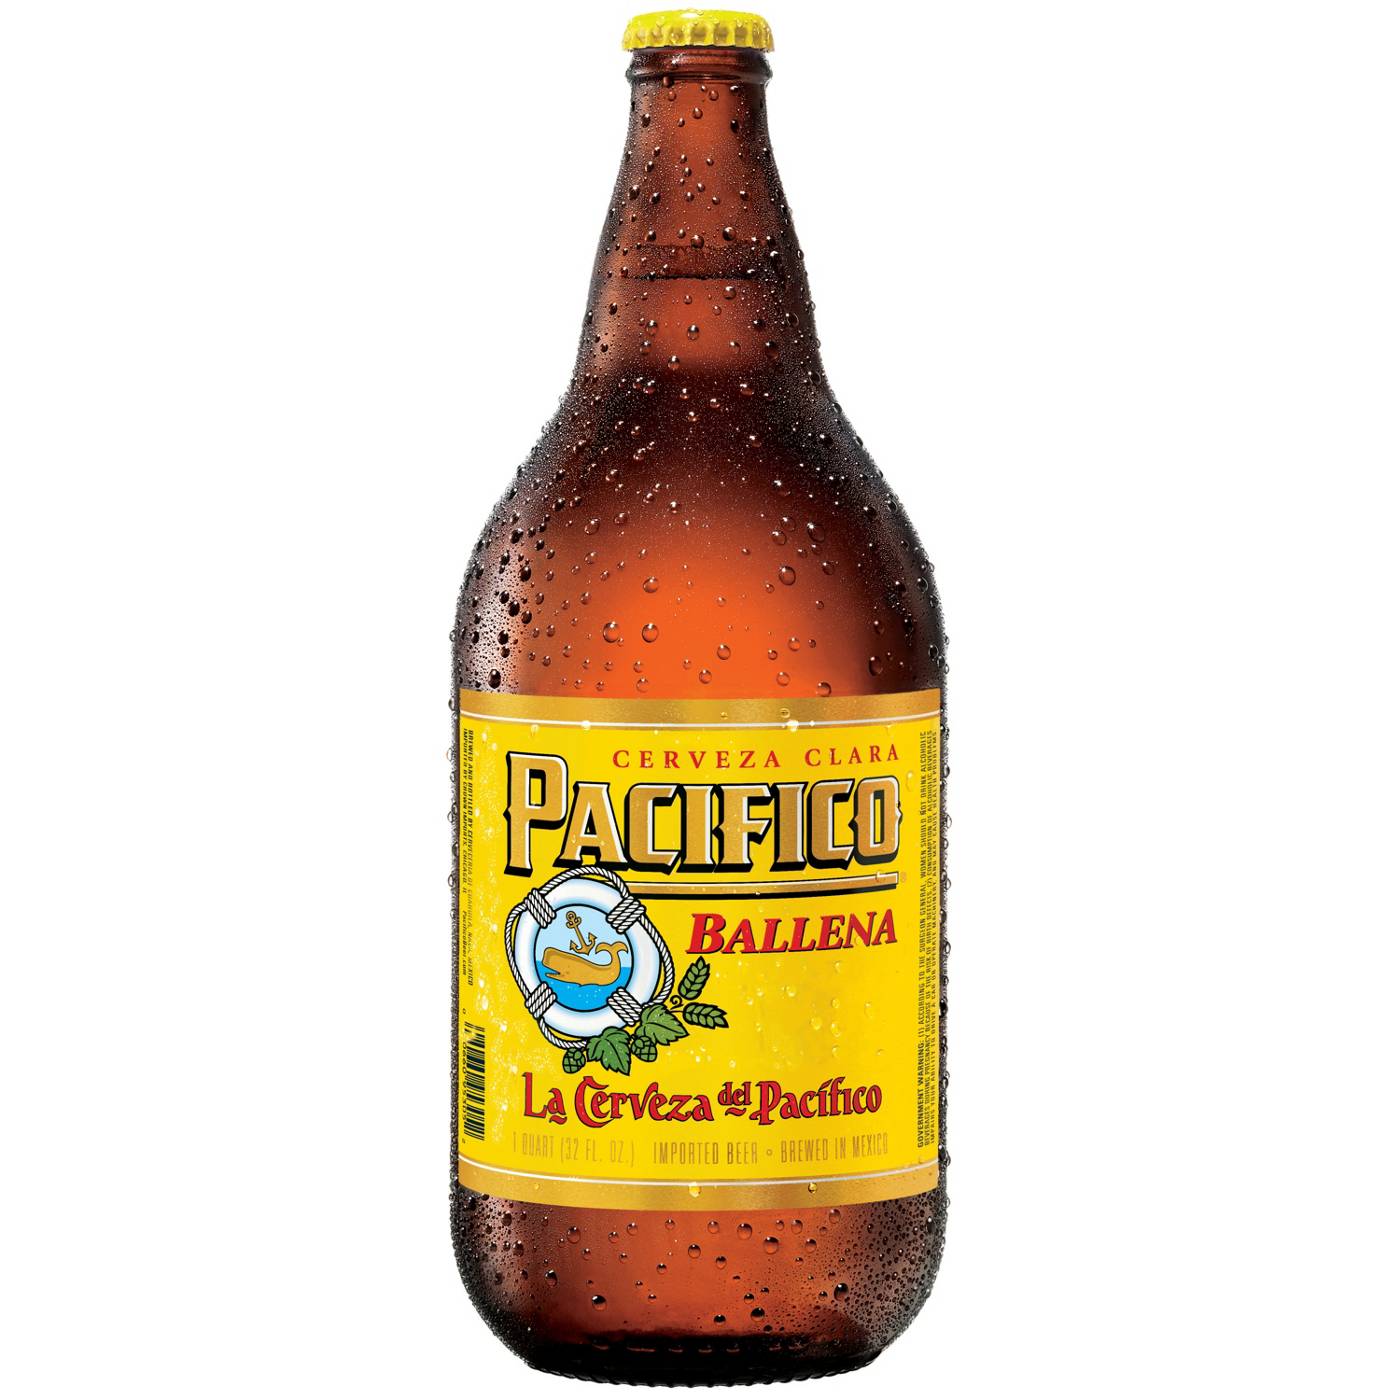 Pacifico Clara Ballena Mexican Lager Import Beer 32 oz Bottle; image 1 of 9